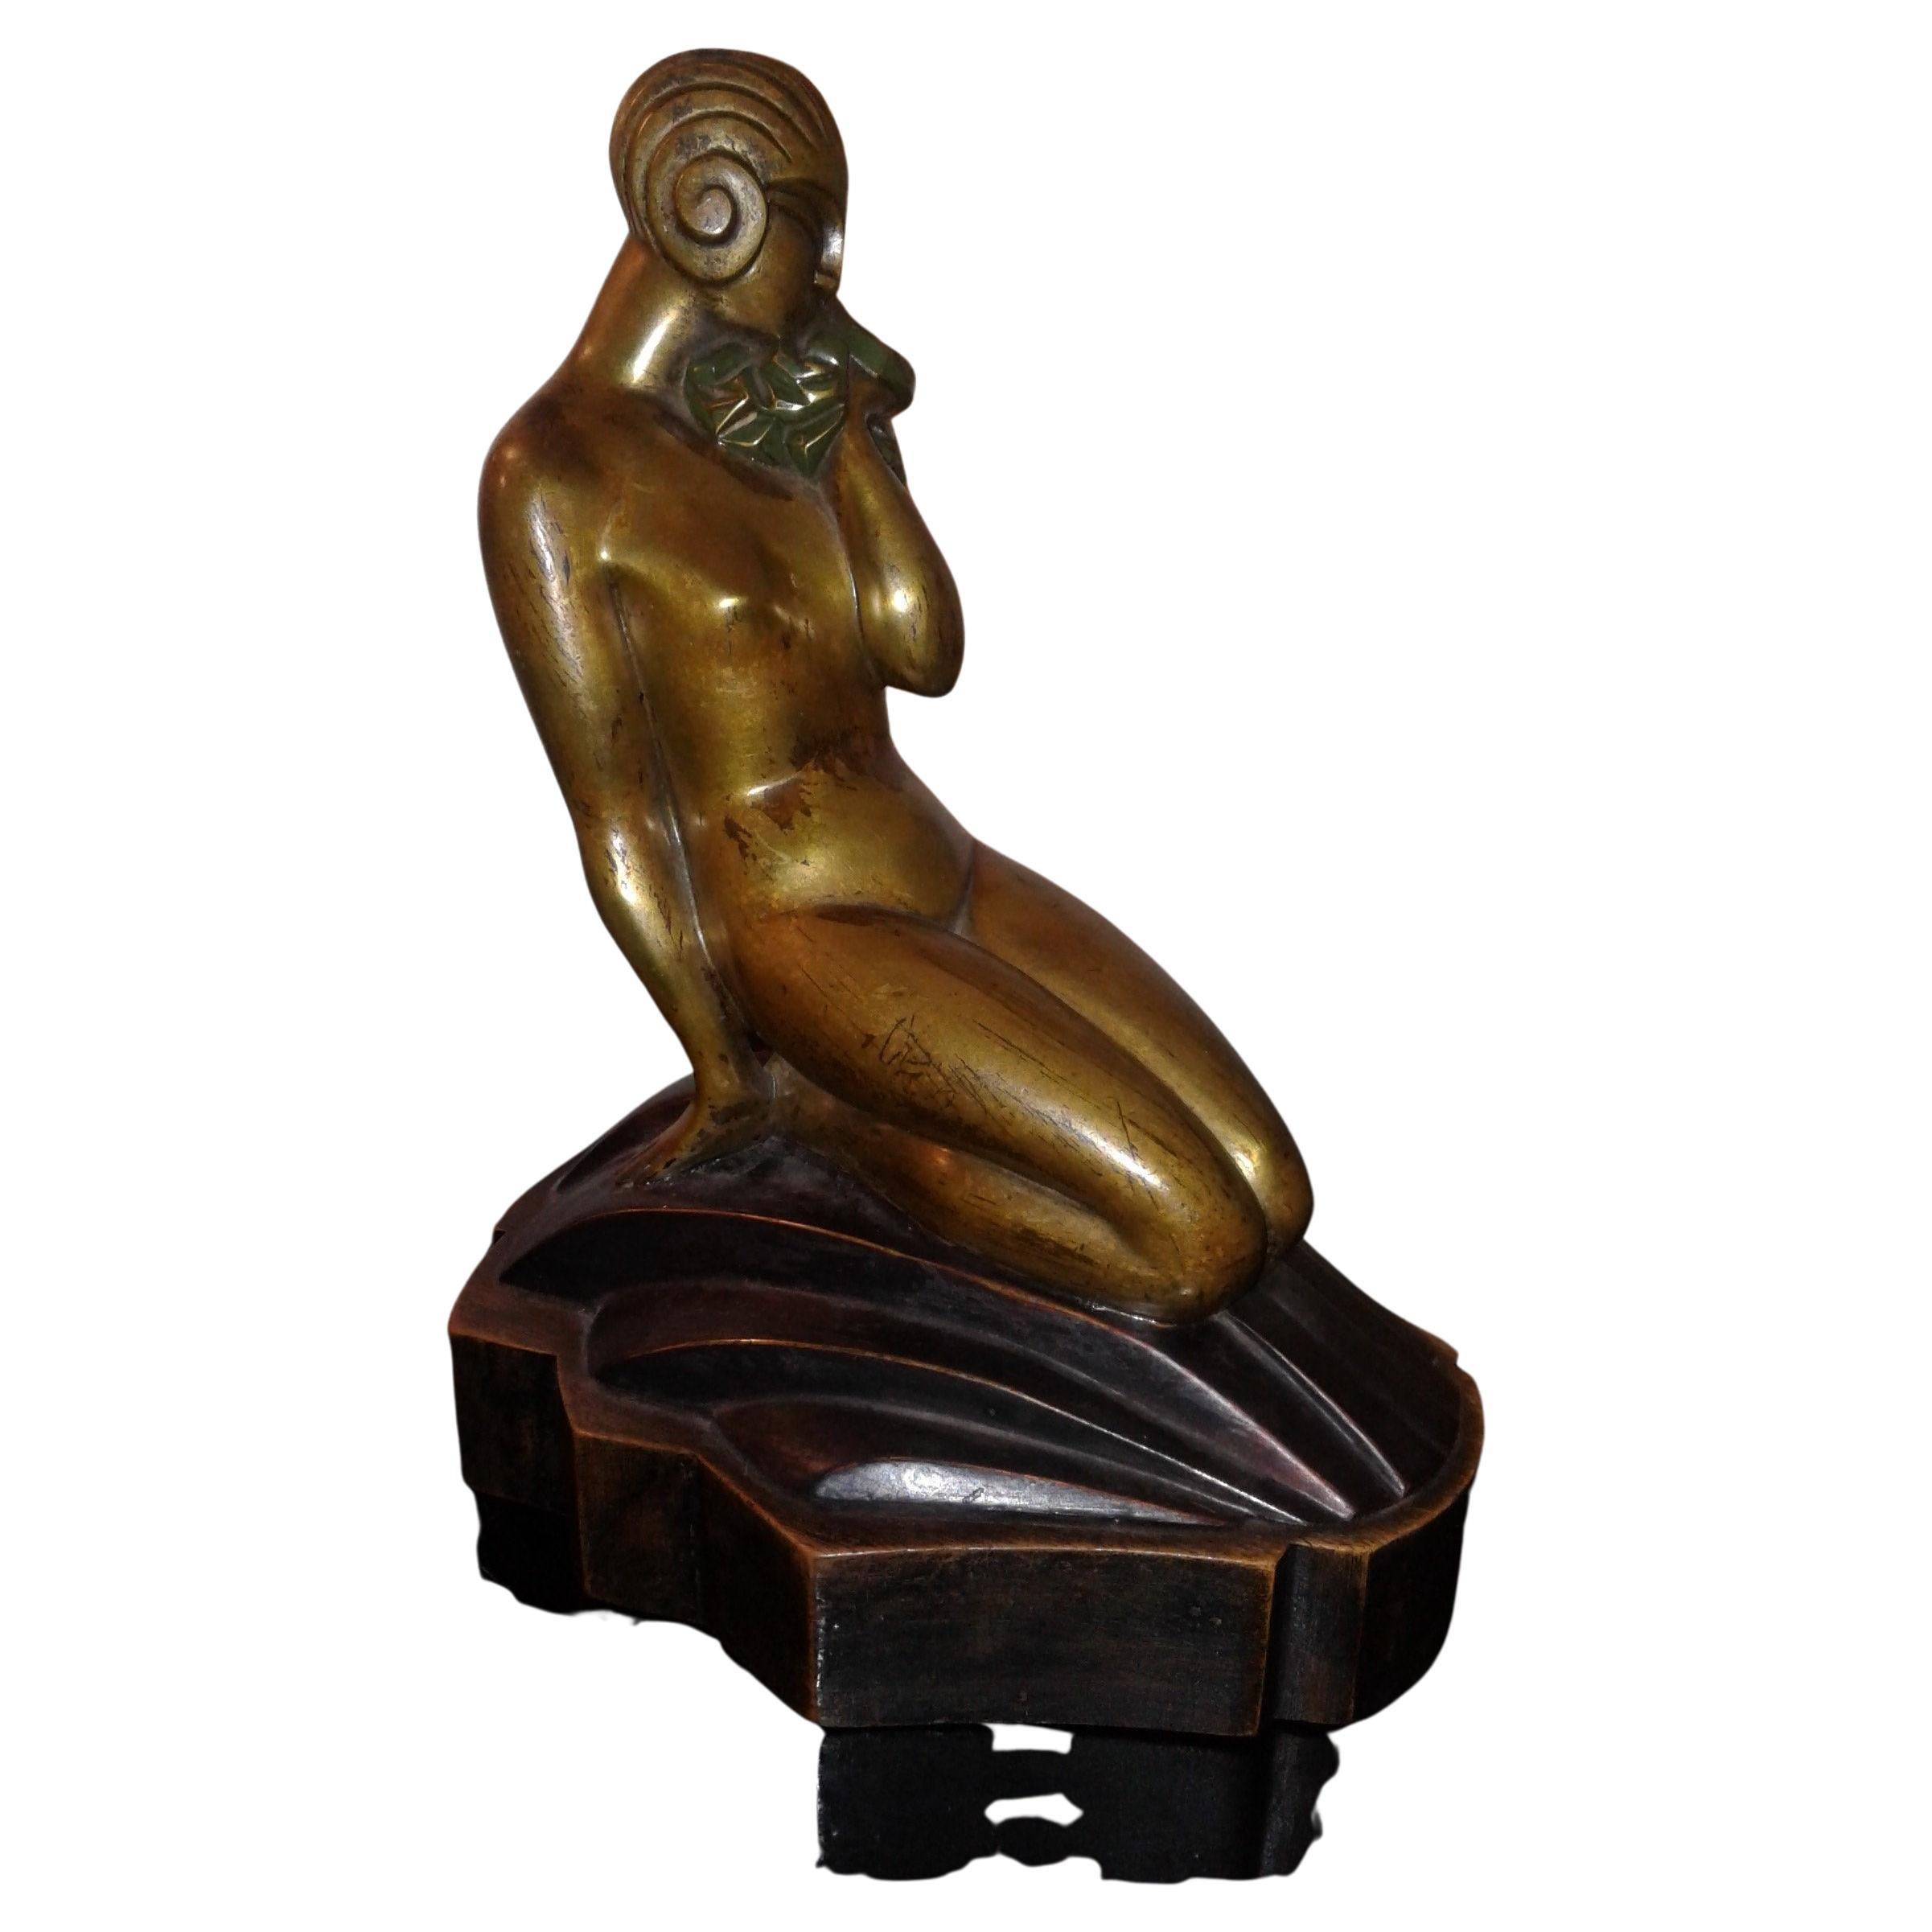 Rare French Art Deco bronze figure of Sibylle May.
English sculptor Sibylle May worked in Paris in the twenties, belonged to the group of artists 